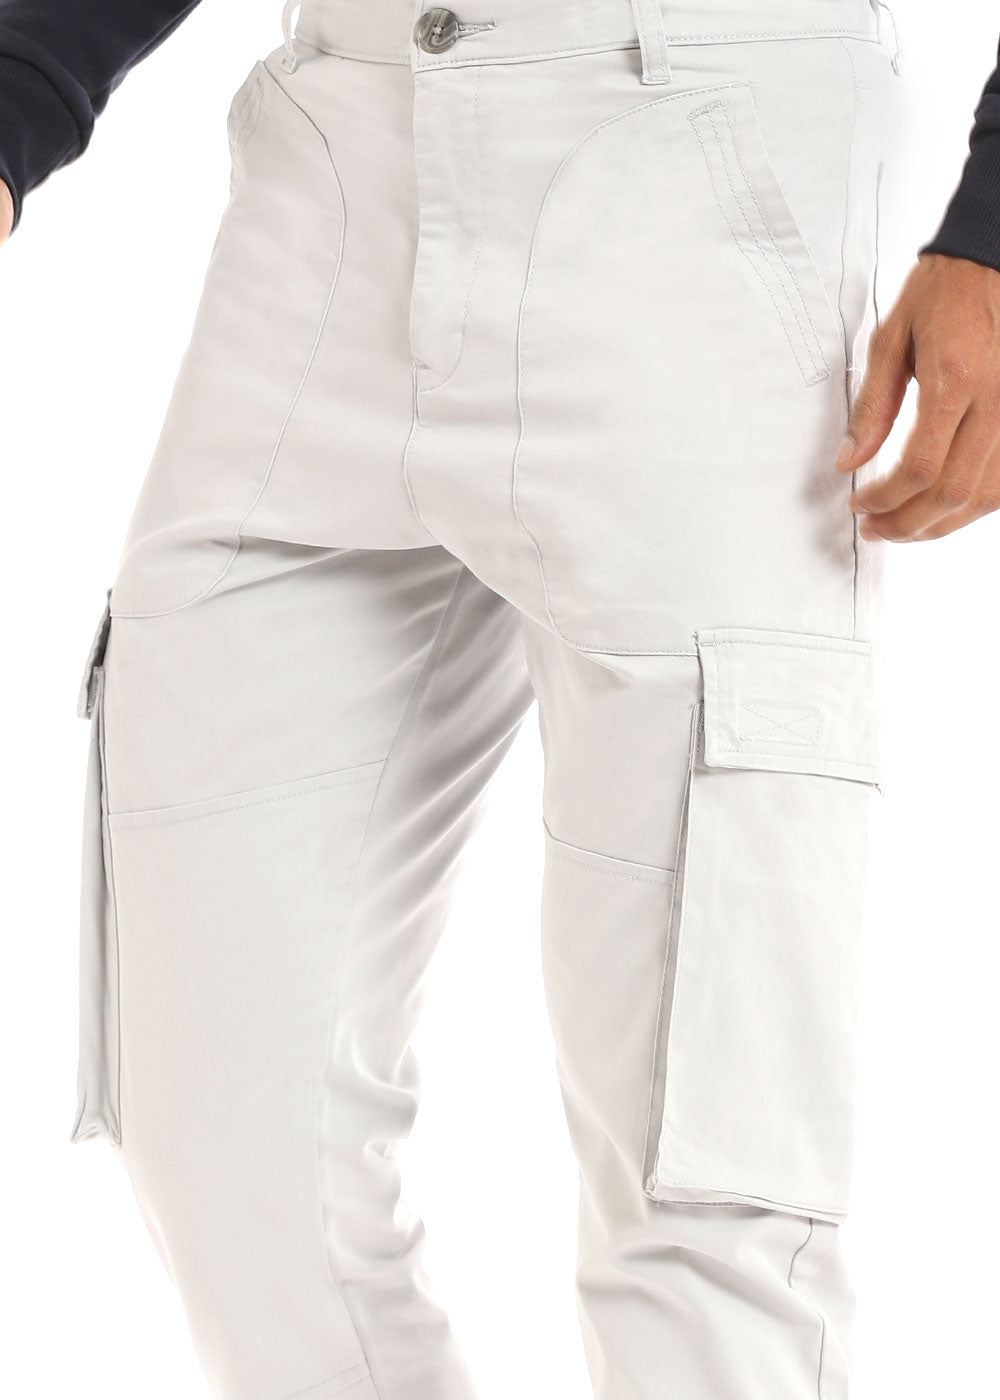 Cool Gray Cargo Pant